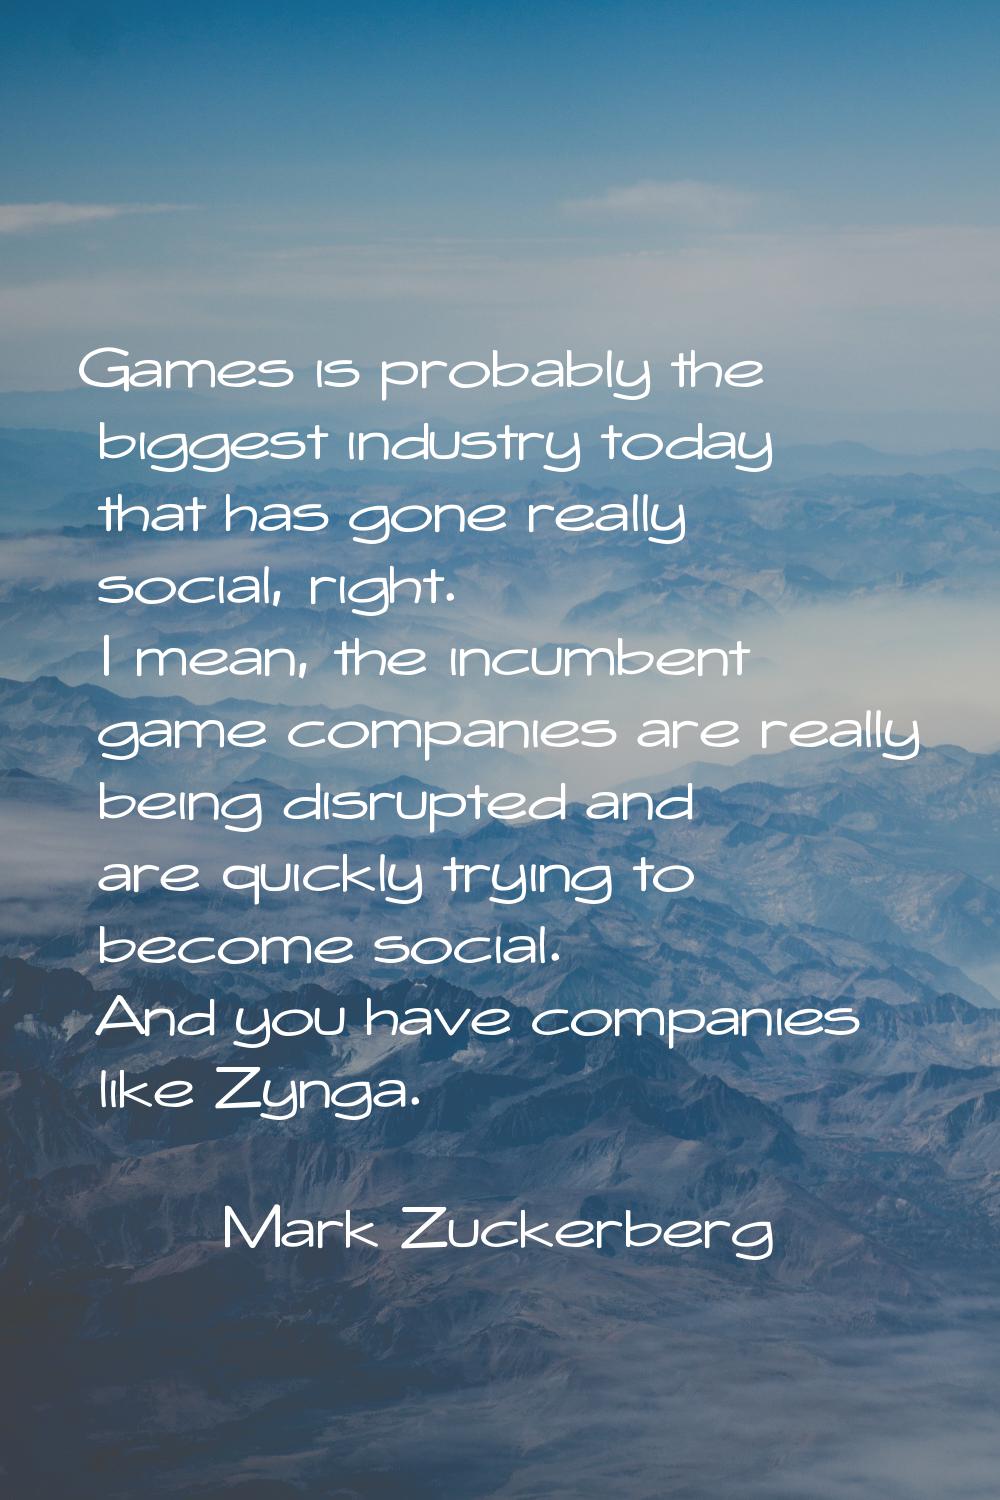 Games is probably the biggest industry today that has gone really social, right. I mean, the incumb